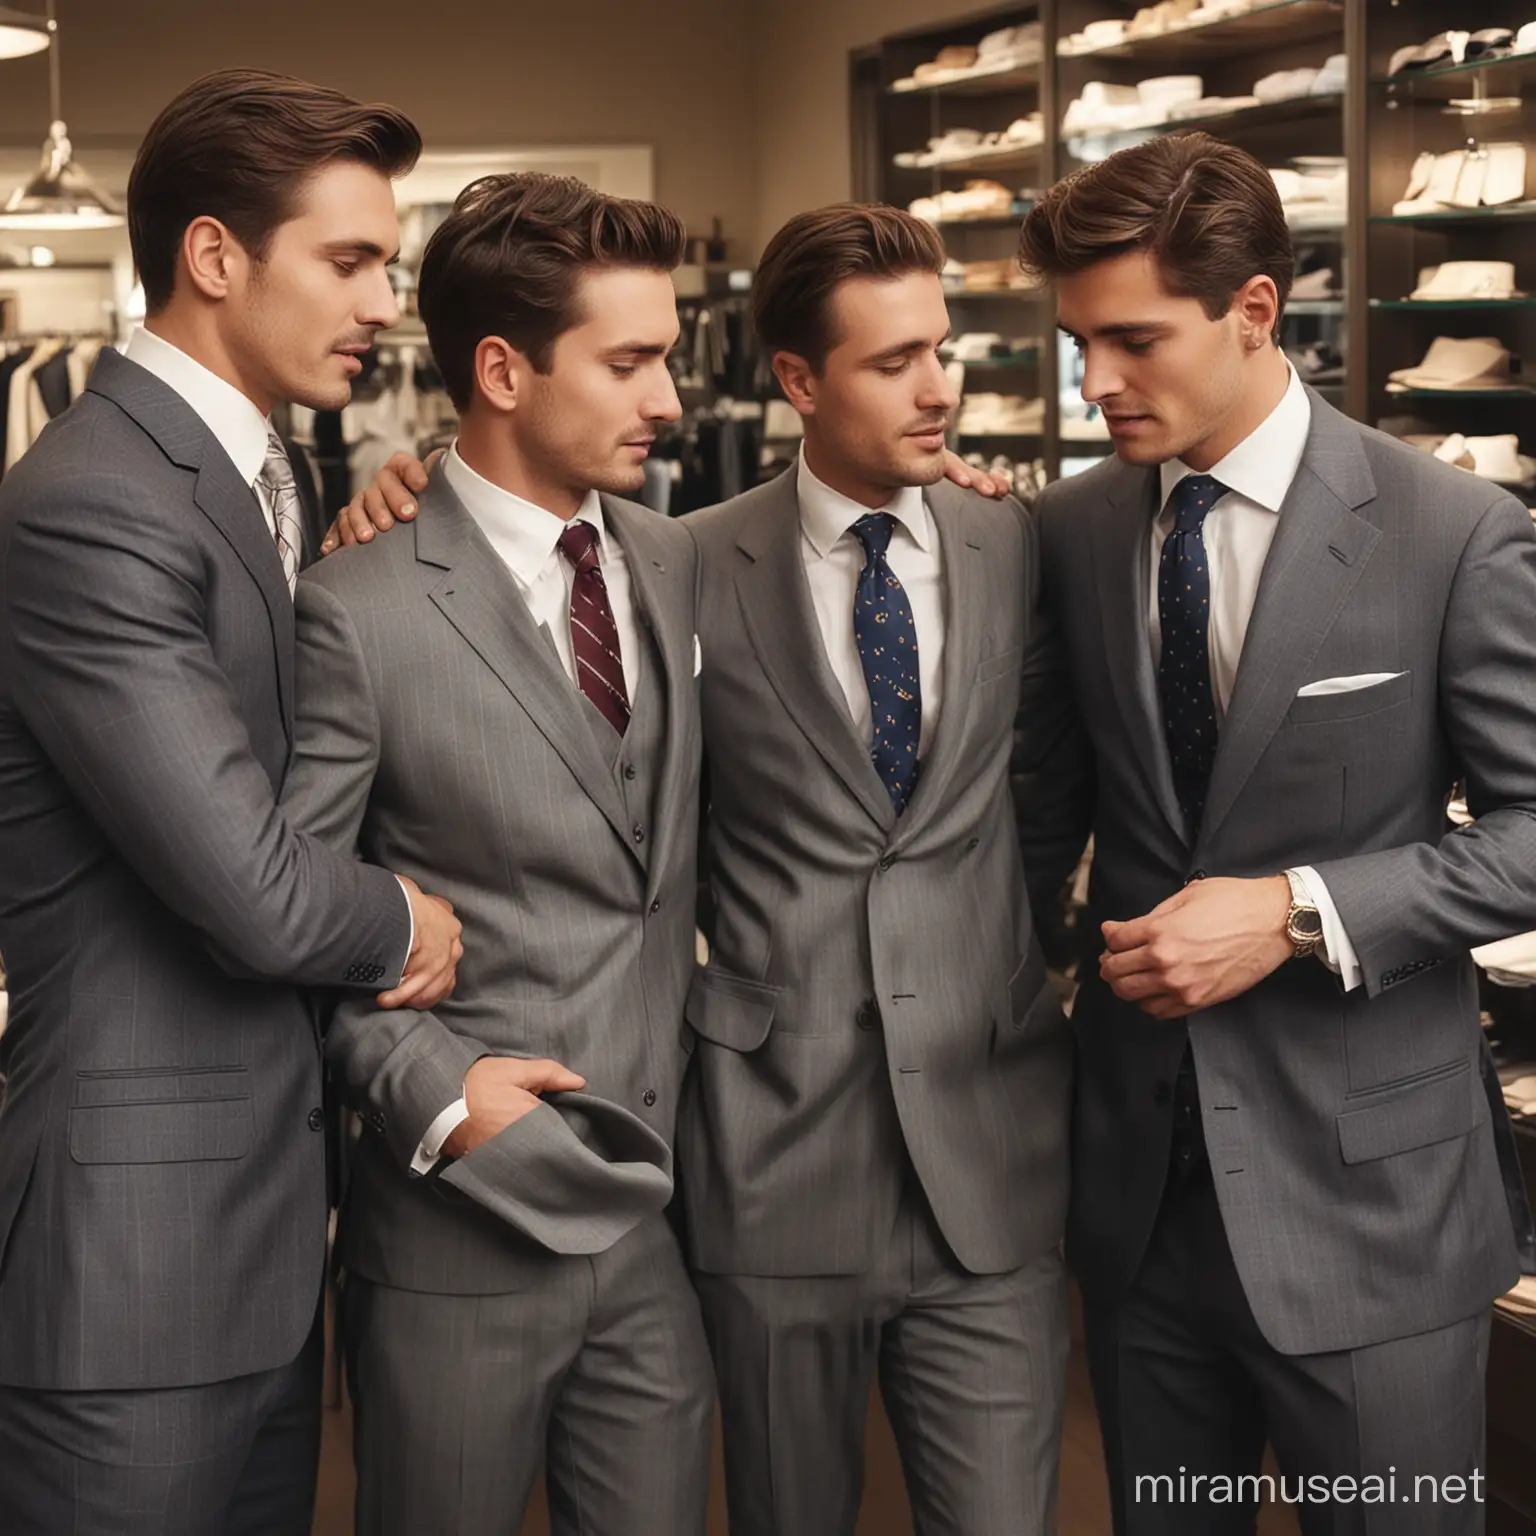 four men trying a new executive suit and tie, in pain, flirting, in a menswear store, Brooks Brothers
